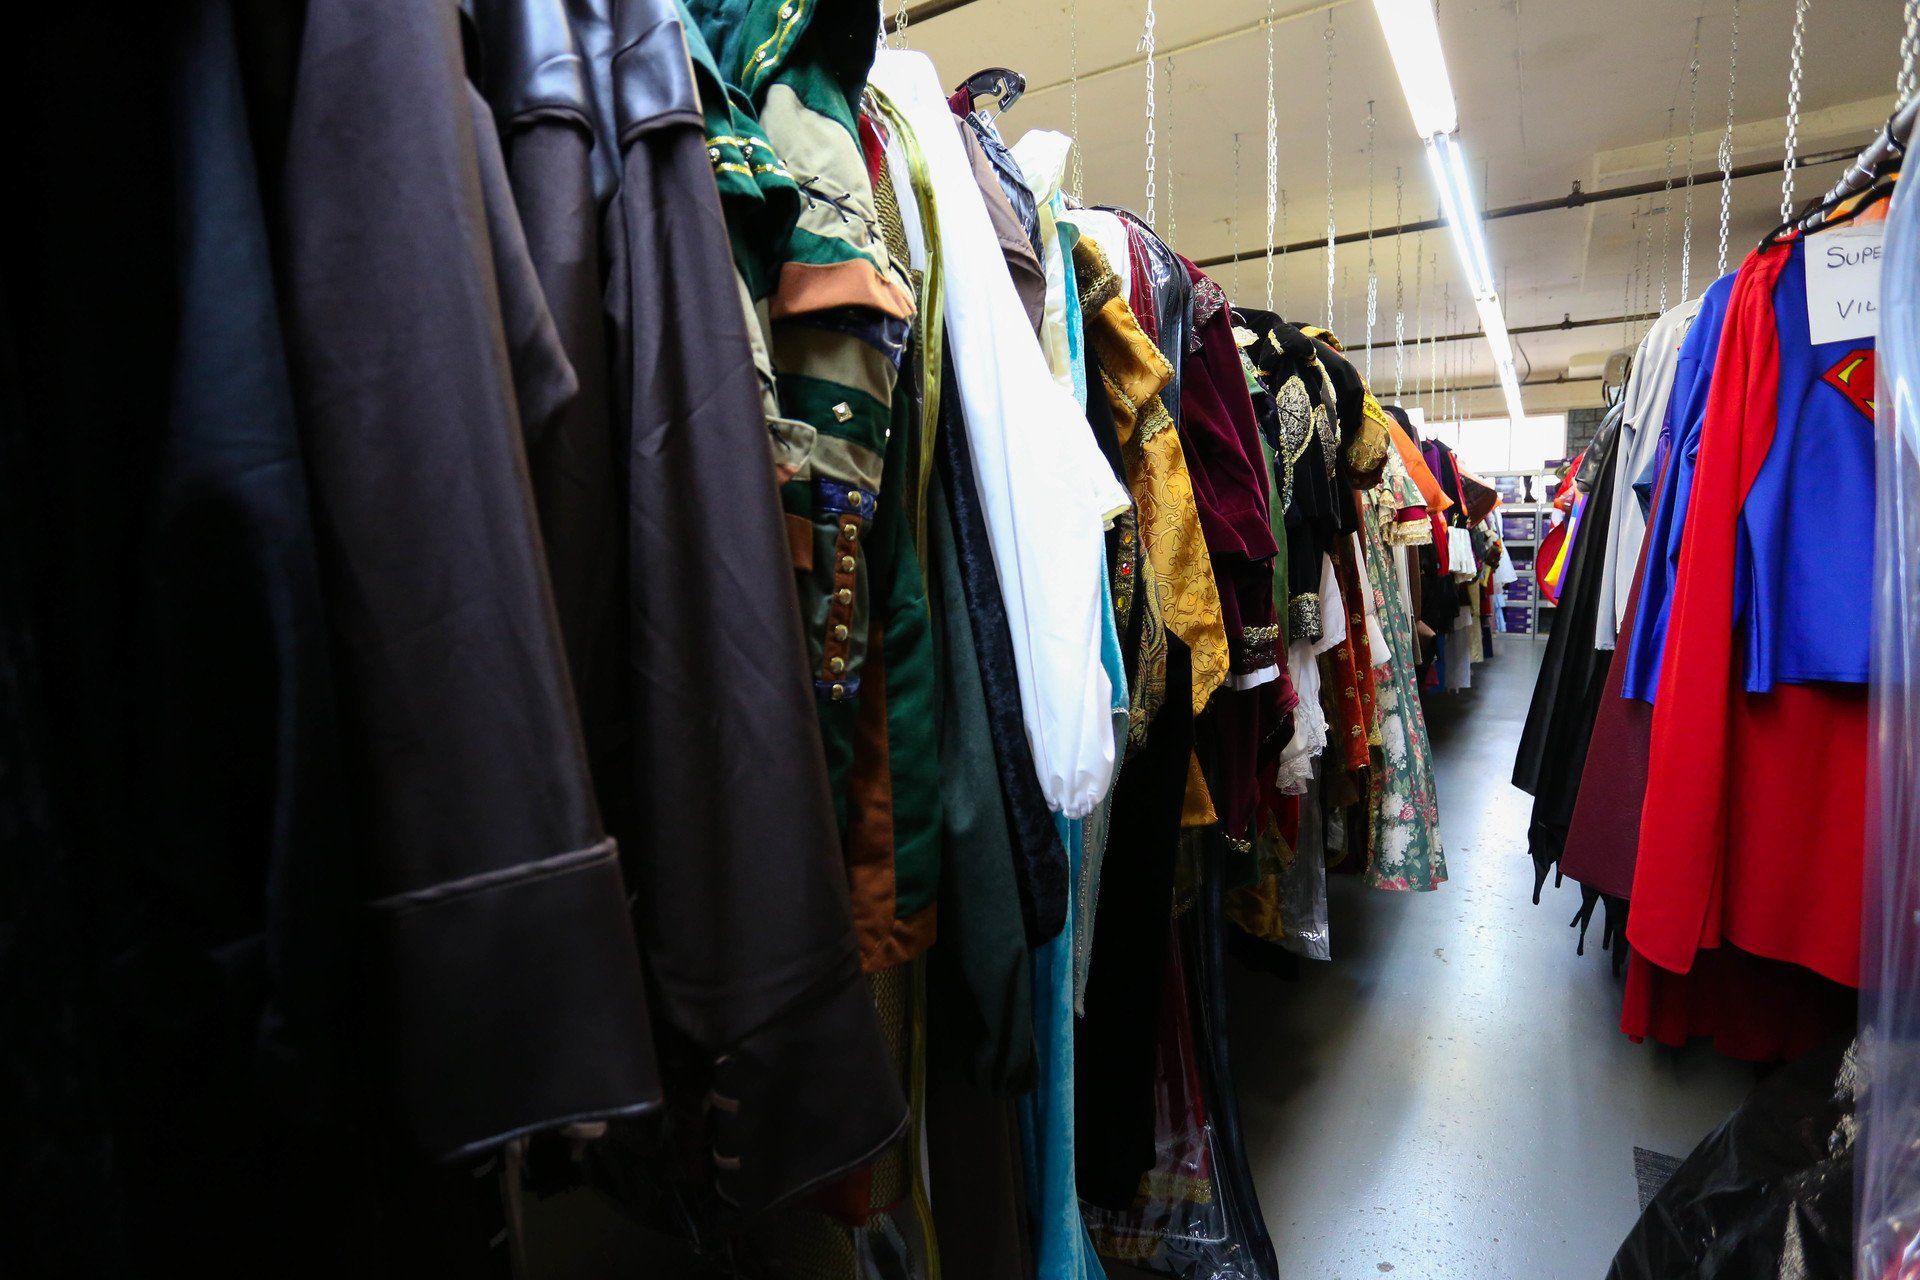 rental costumes, costume rentals for adult